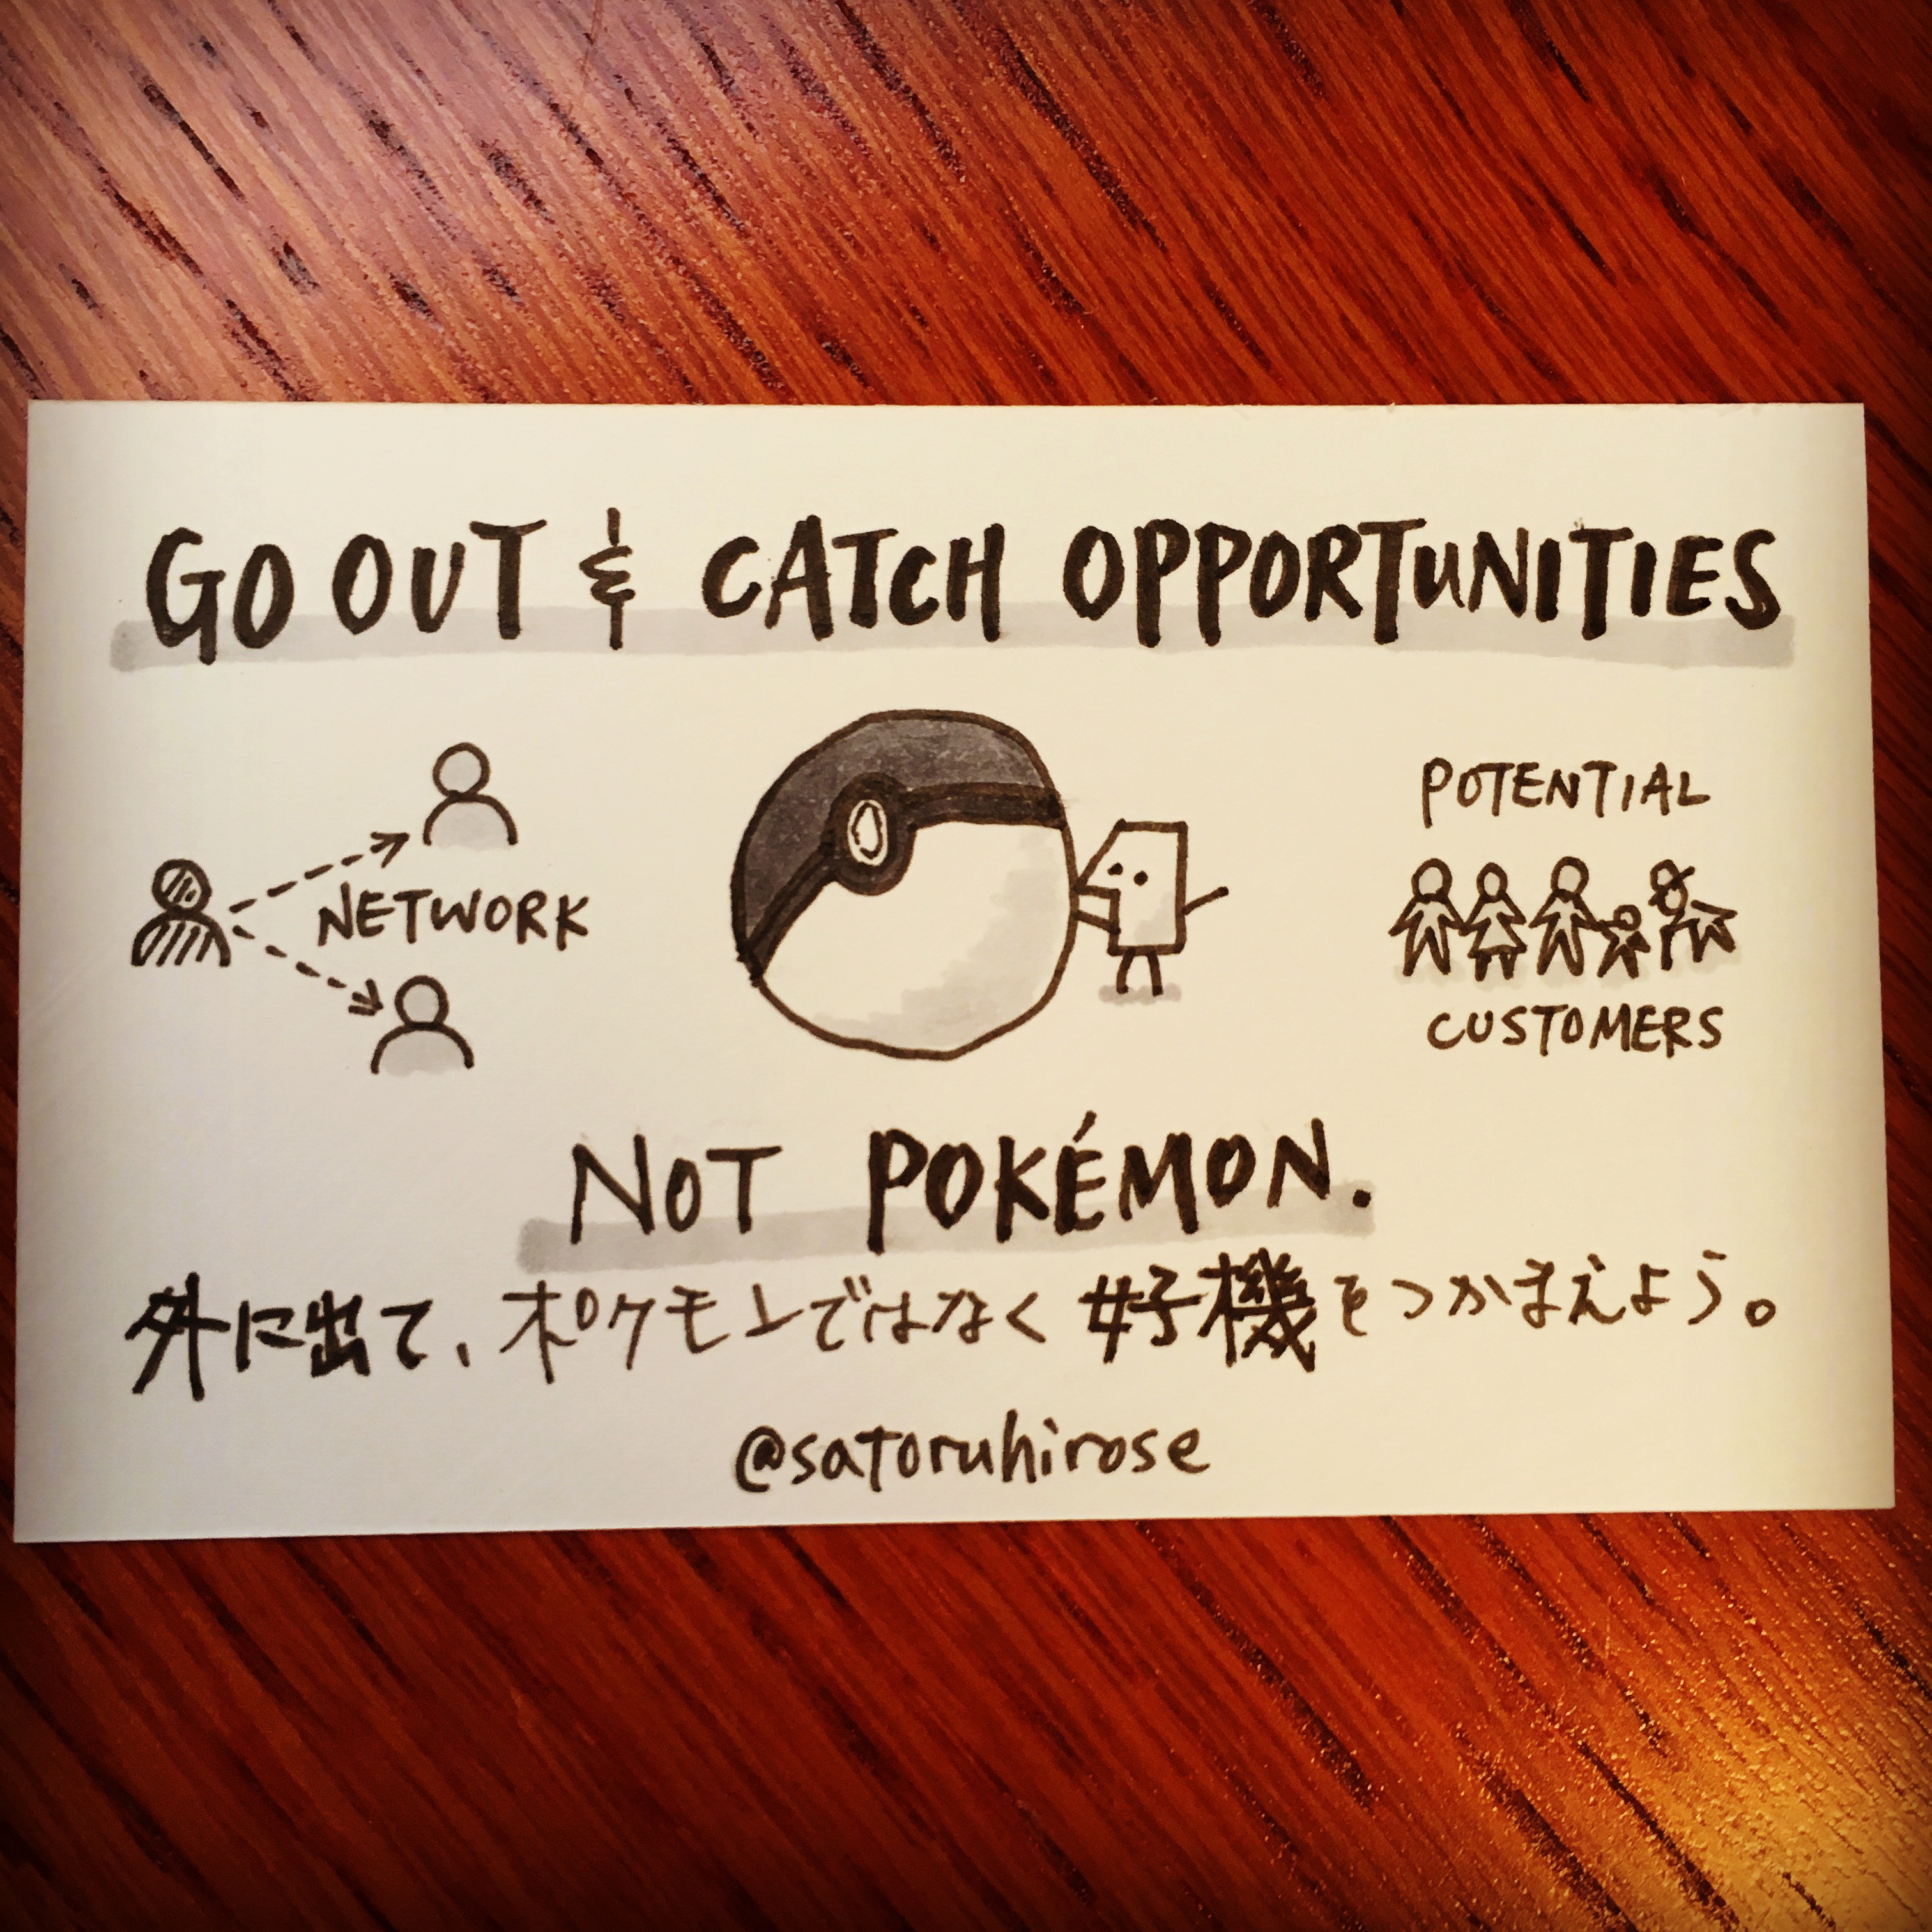 Go out and catch opportunities, not Pokemon.